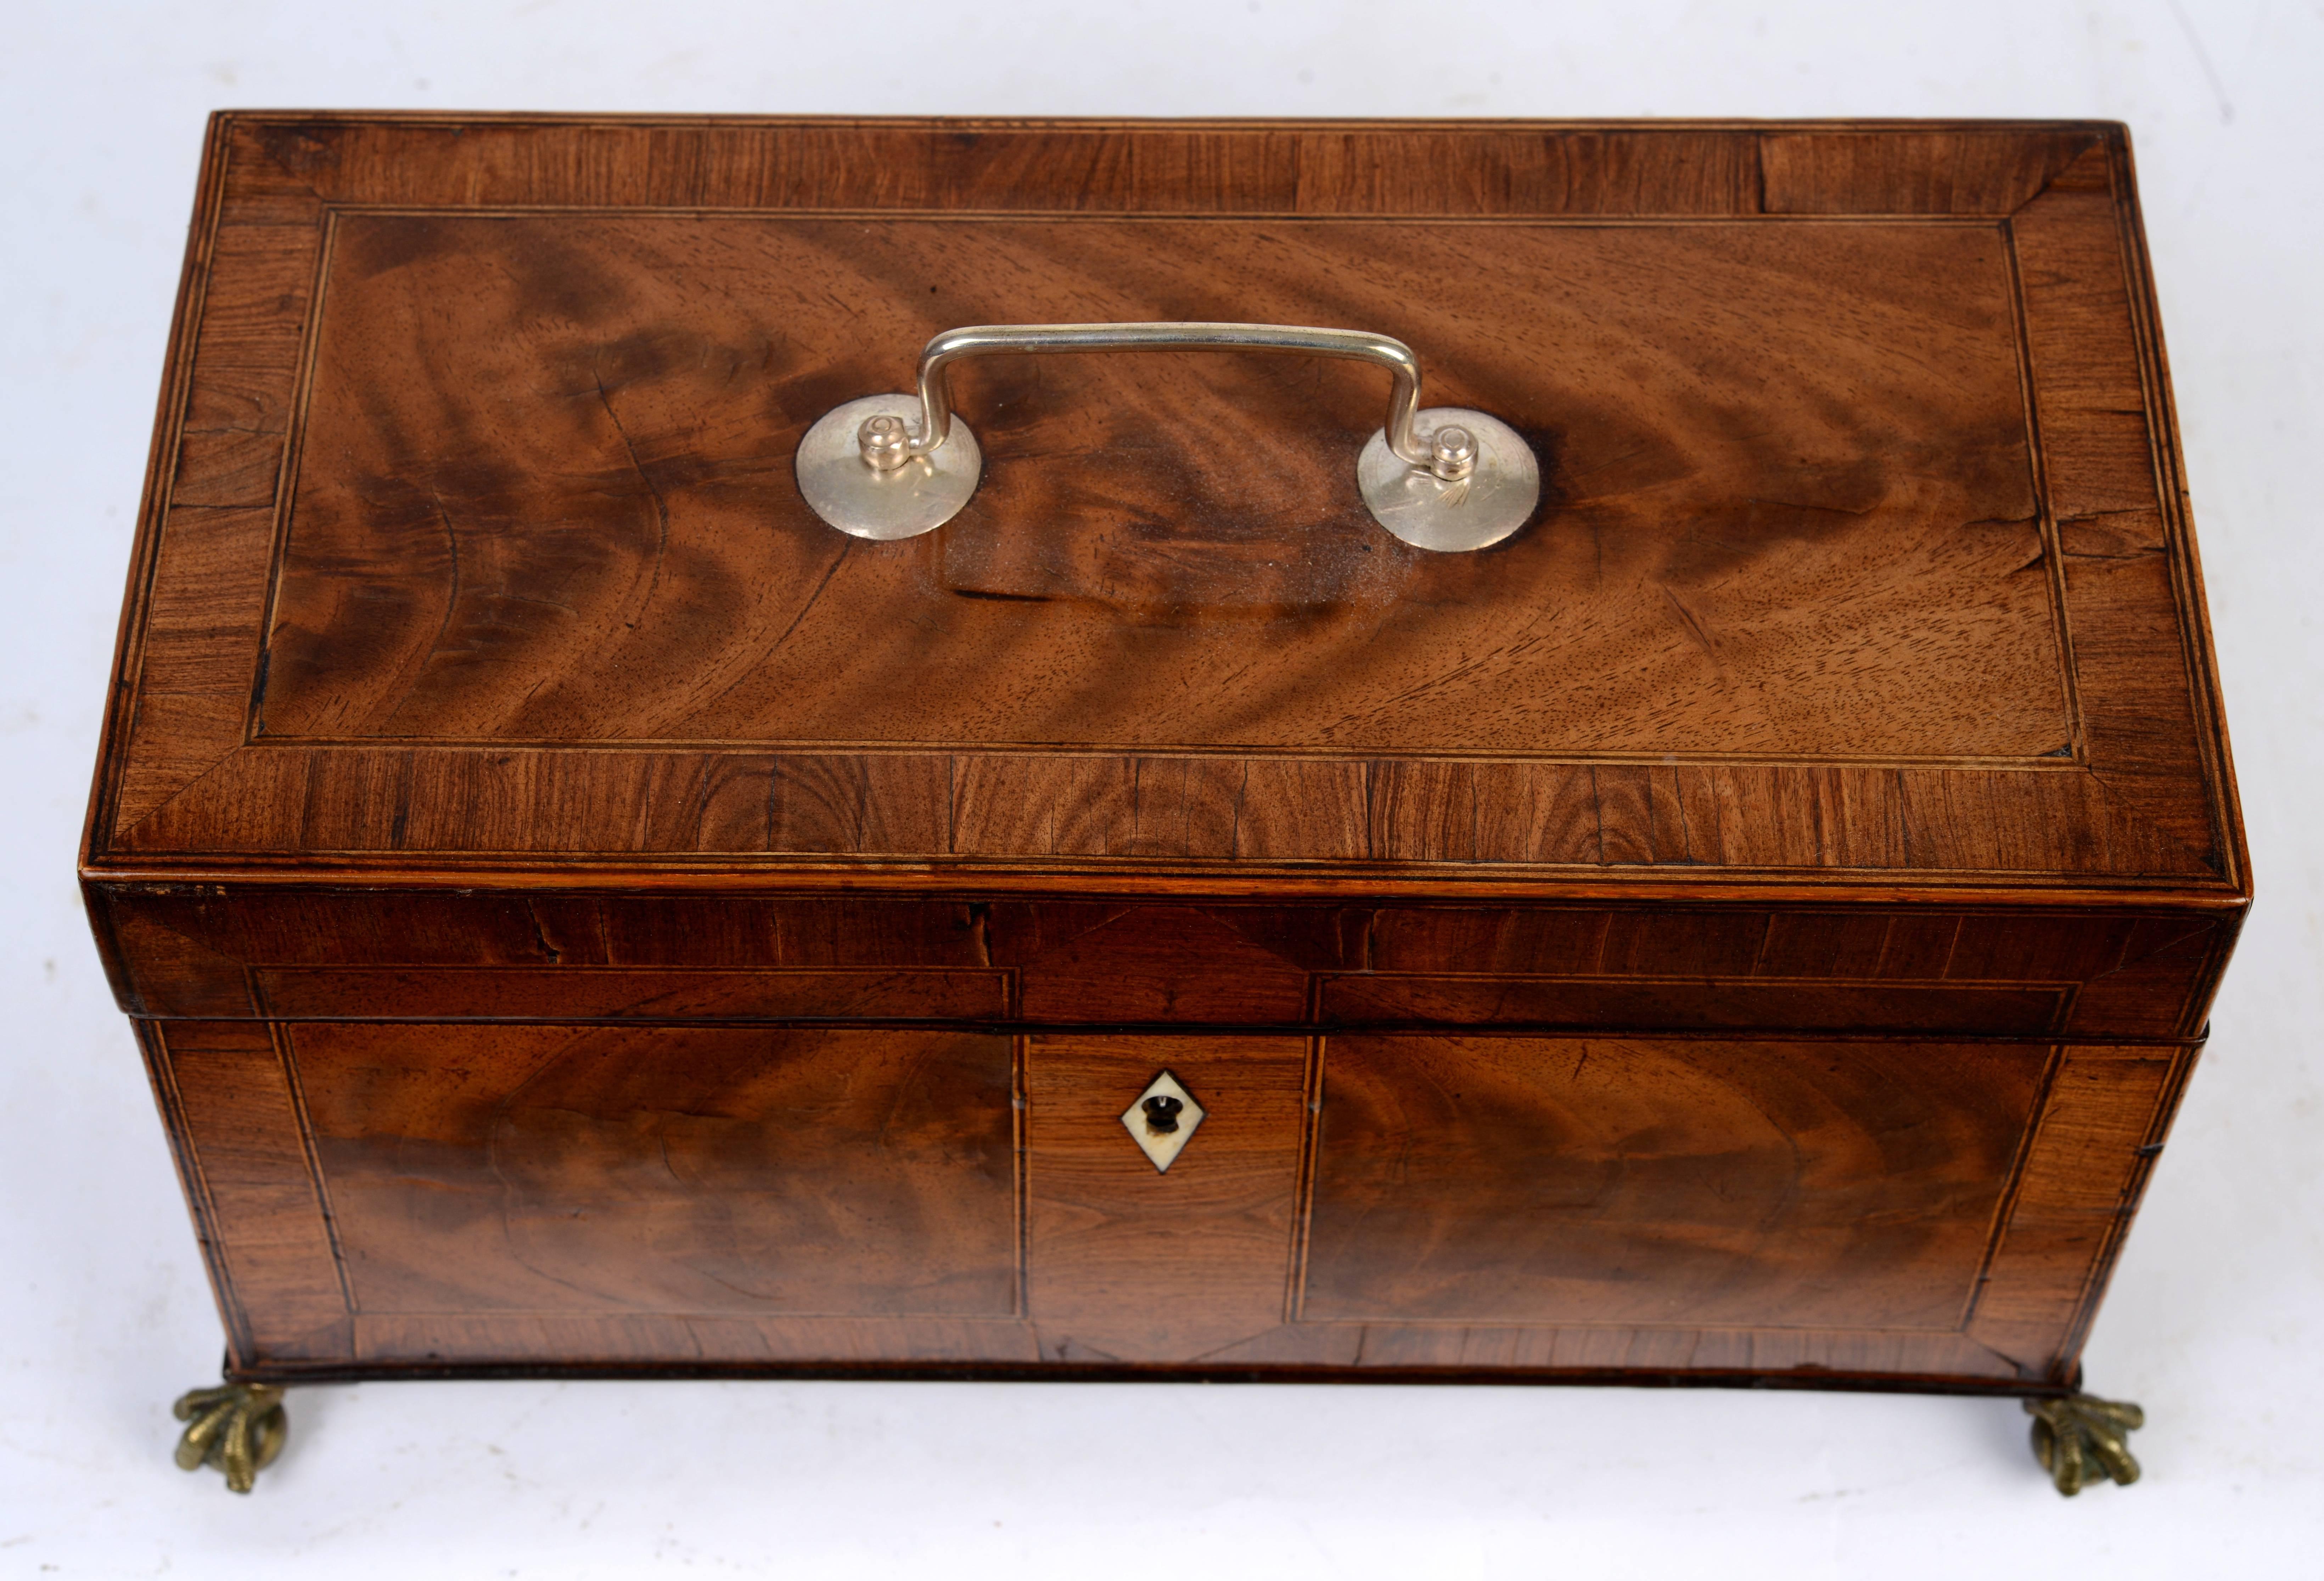 Chippendale tea caddy, c1770, burl veneered mahogany paneled front and sides with cross banded border raised on original ball and claw cast brass feet. The two interior compartments, each with a hinged burled mahogany cross-banded lid, still retain